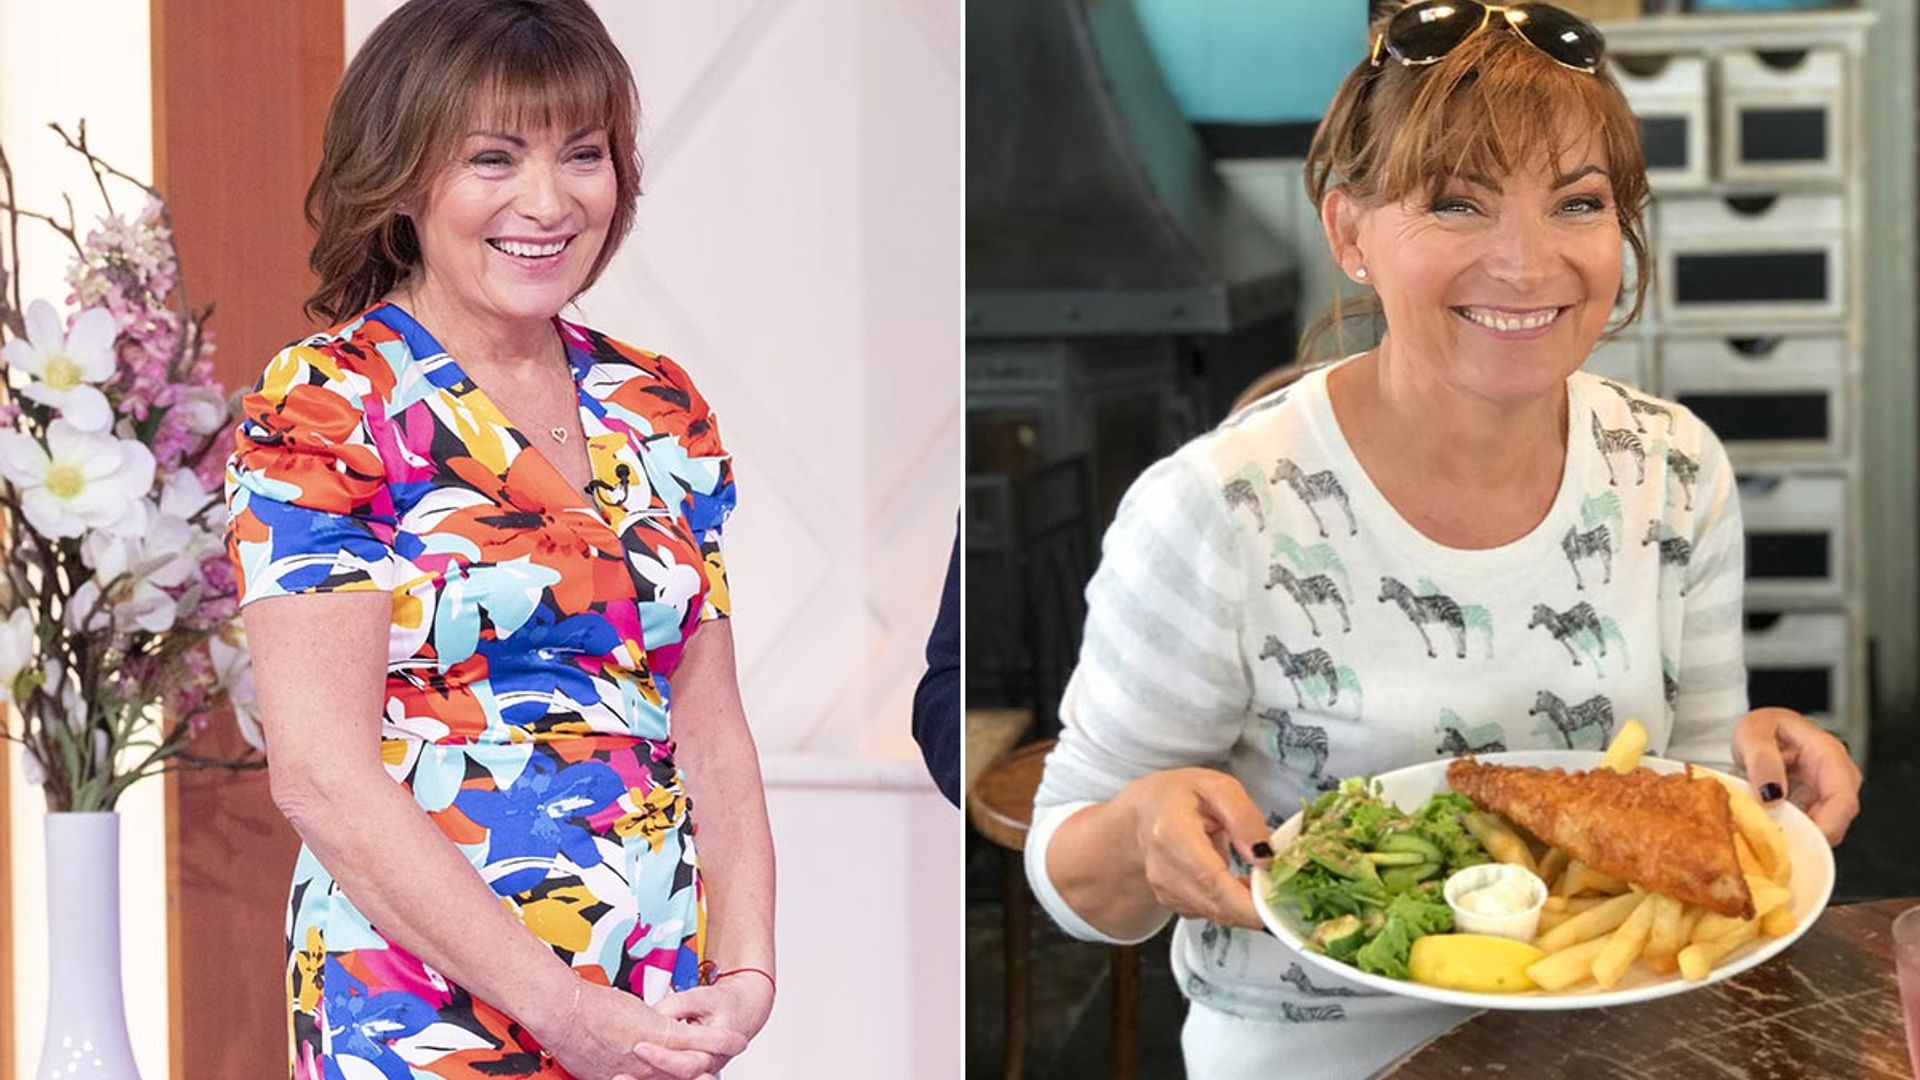 Lorraine Kelly's daily diet: the TV presenter's breakfast, lunch and dinner revealed